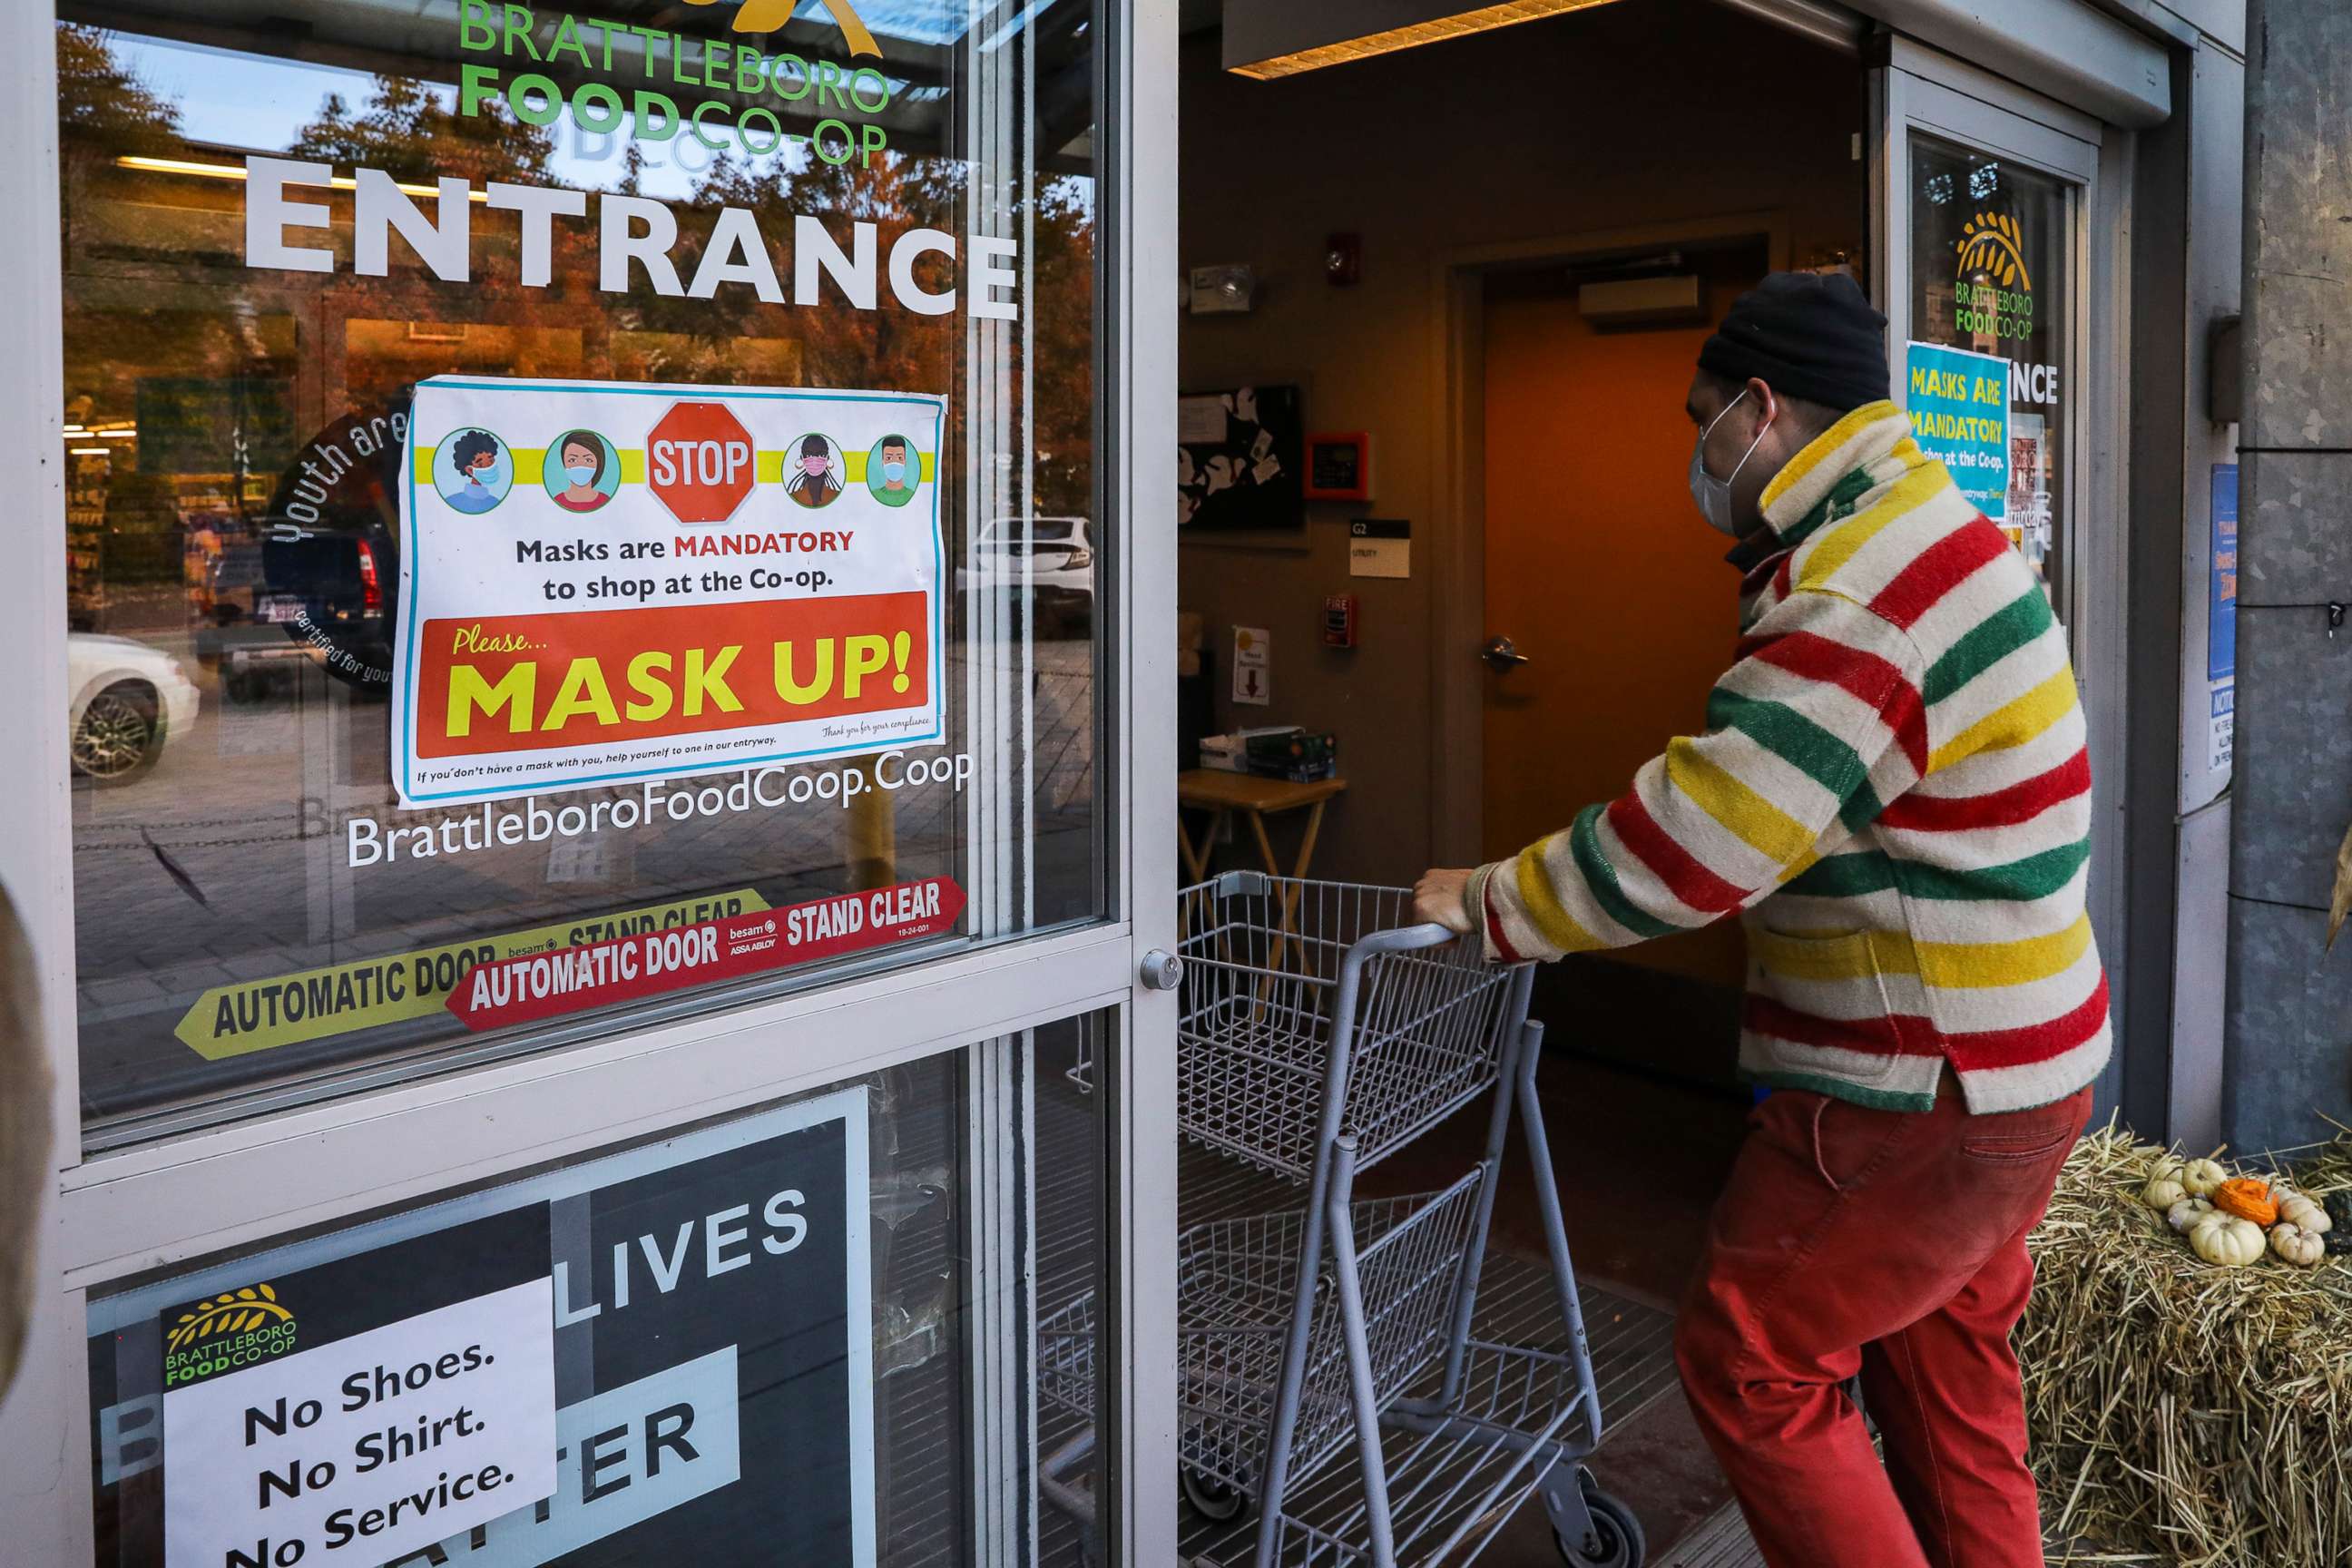 PHOTO: A mask up! sign greets customers at the entrance of the Brattleboro Food Co-op, Oct. 29, 2021, in downtown Brattleboro, Vt. 